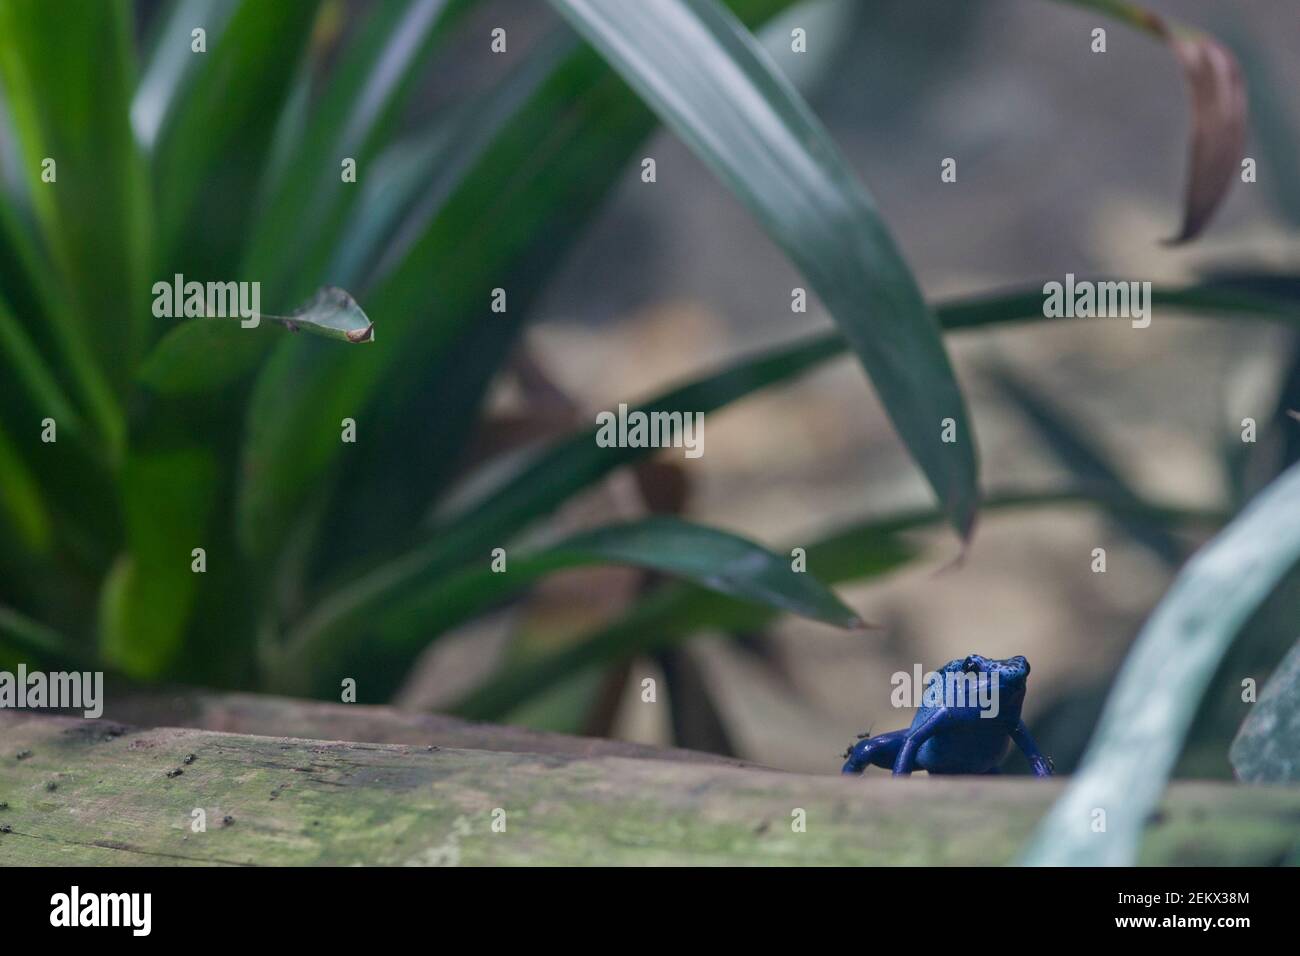 Tiny frog, micro frog, poison dart frog, Sky-blue, tropical frog, mini frog, poisonous, tiny but deadly, small but deadly, frog on plant, Stock Photo